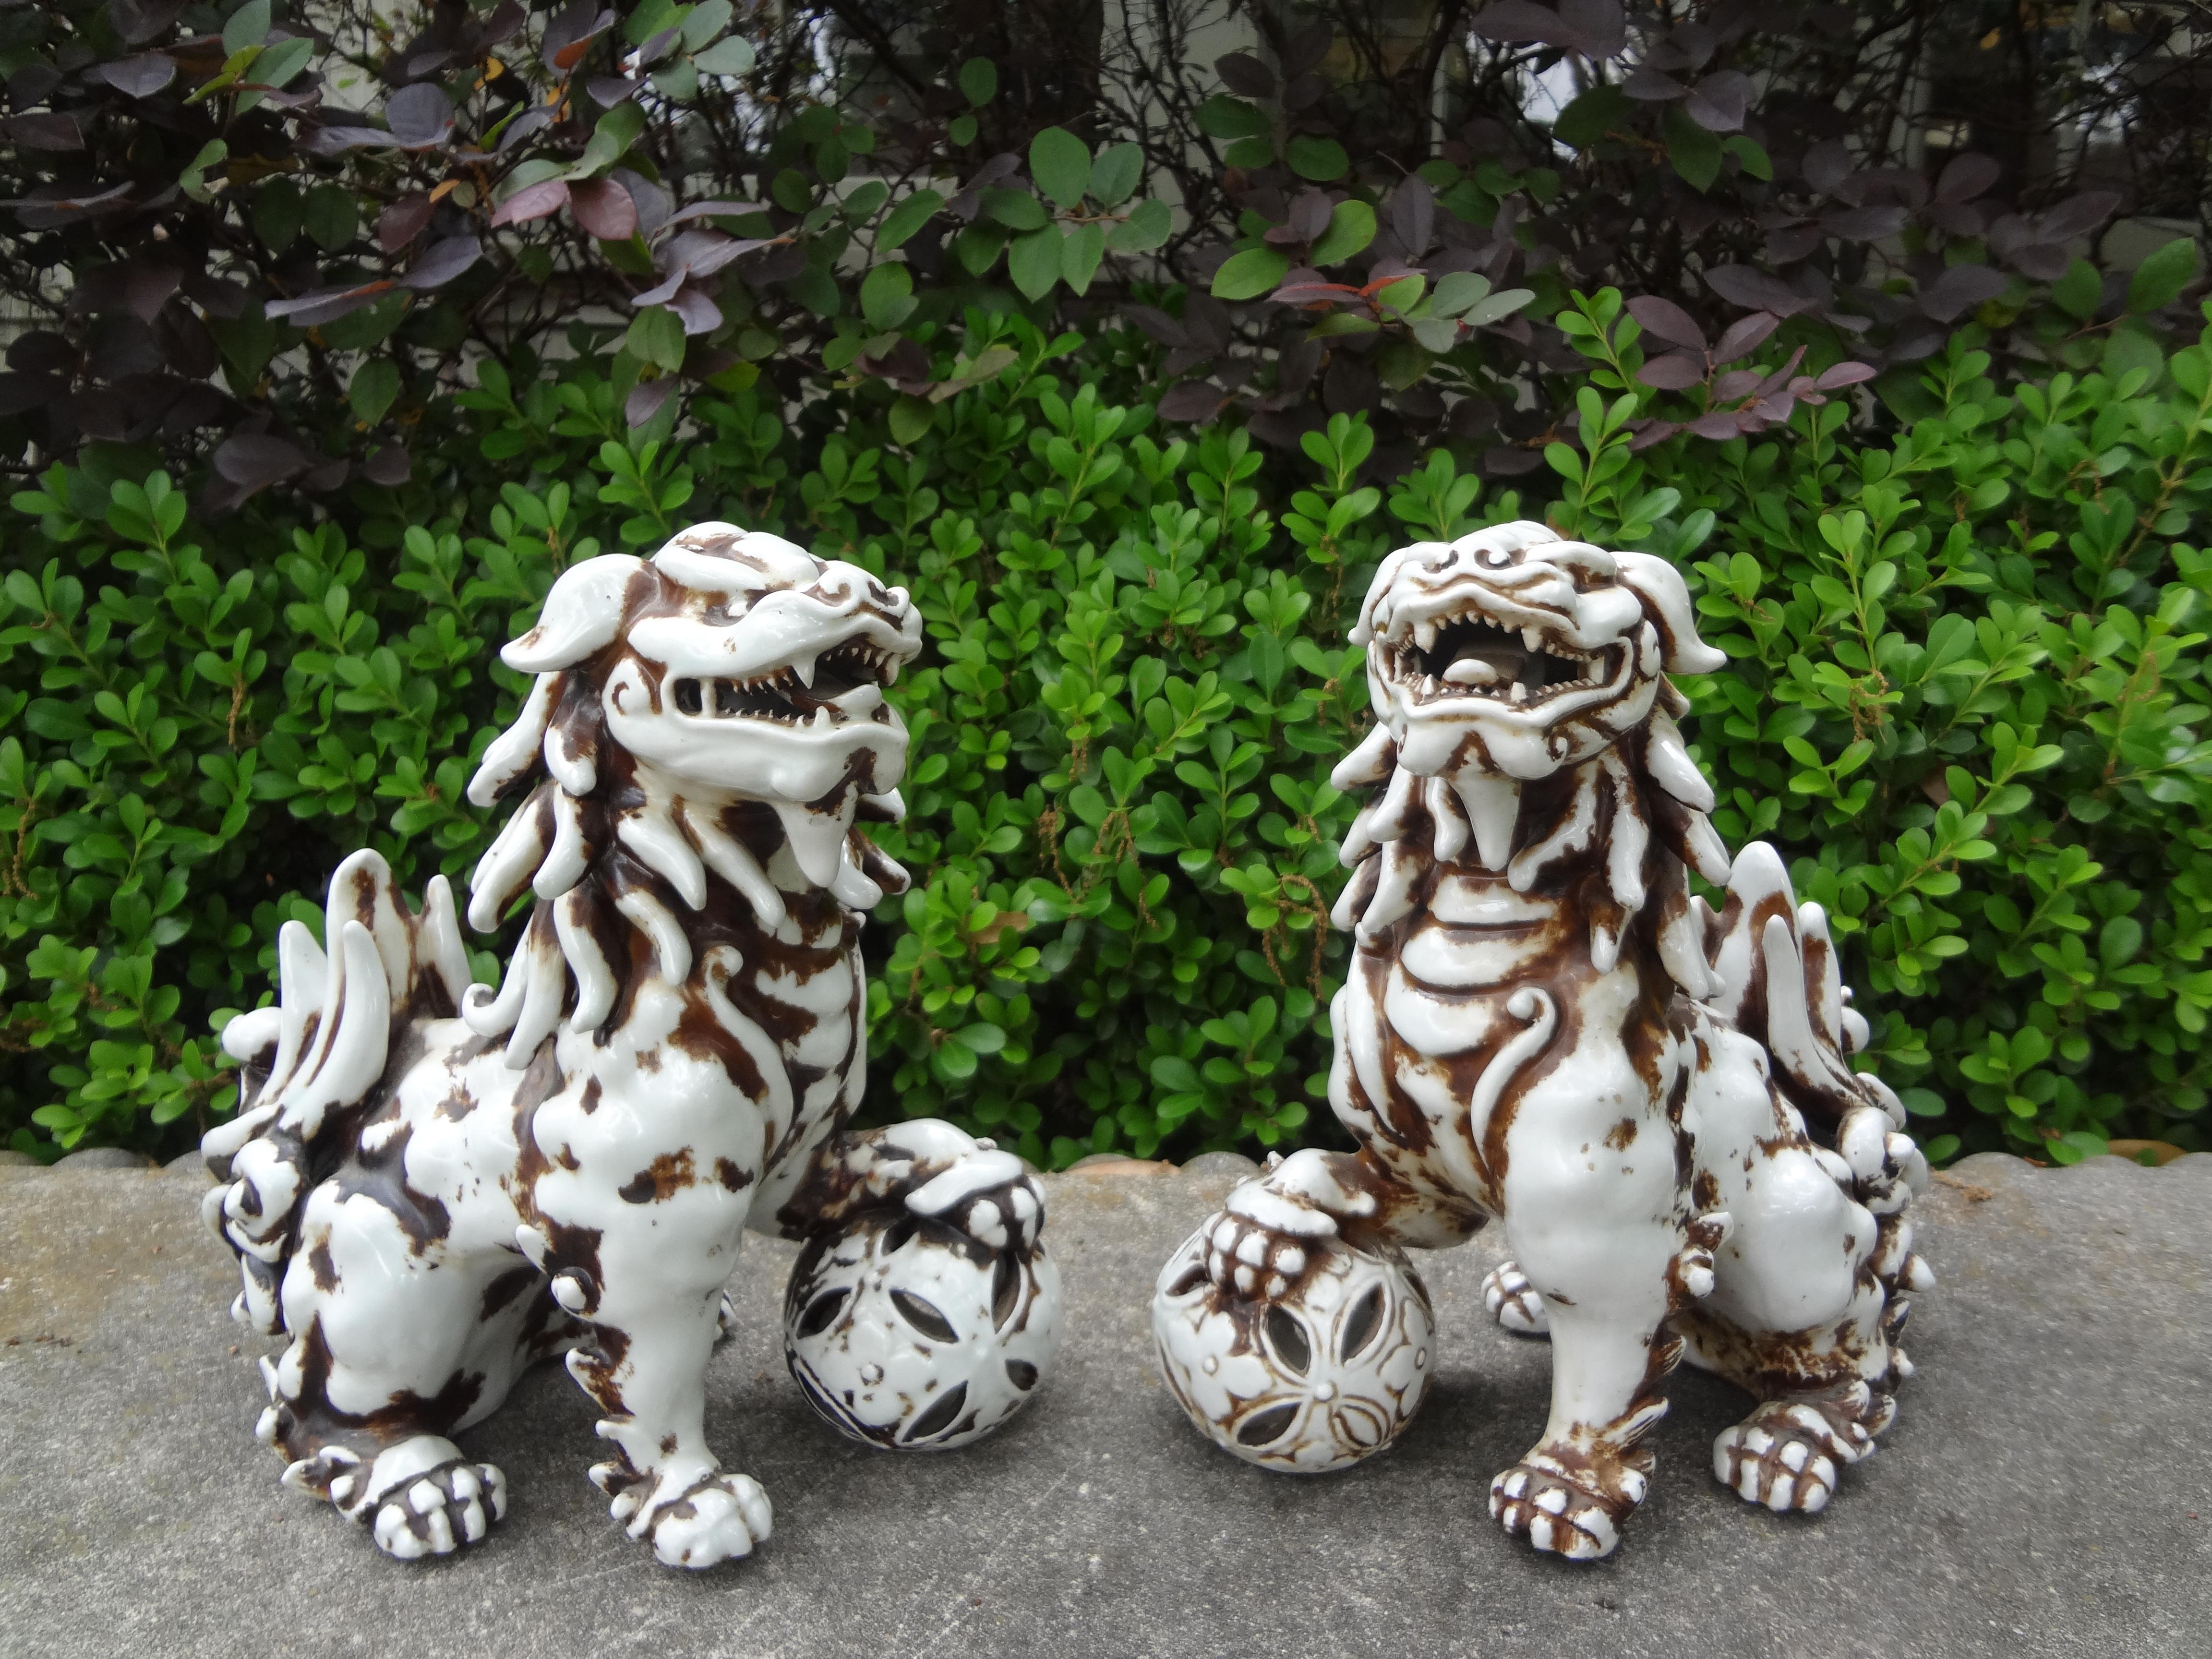 Pair Of Chinese Glazed Ceramic Foo Dogs.
This unusual pair of Chinese export glazed ceramic foo dogs are of cream and black
color with illegible markings.
Great pair!